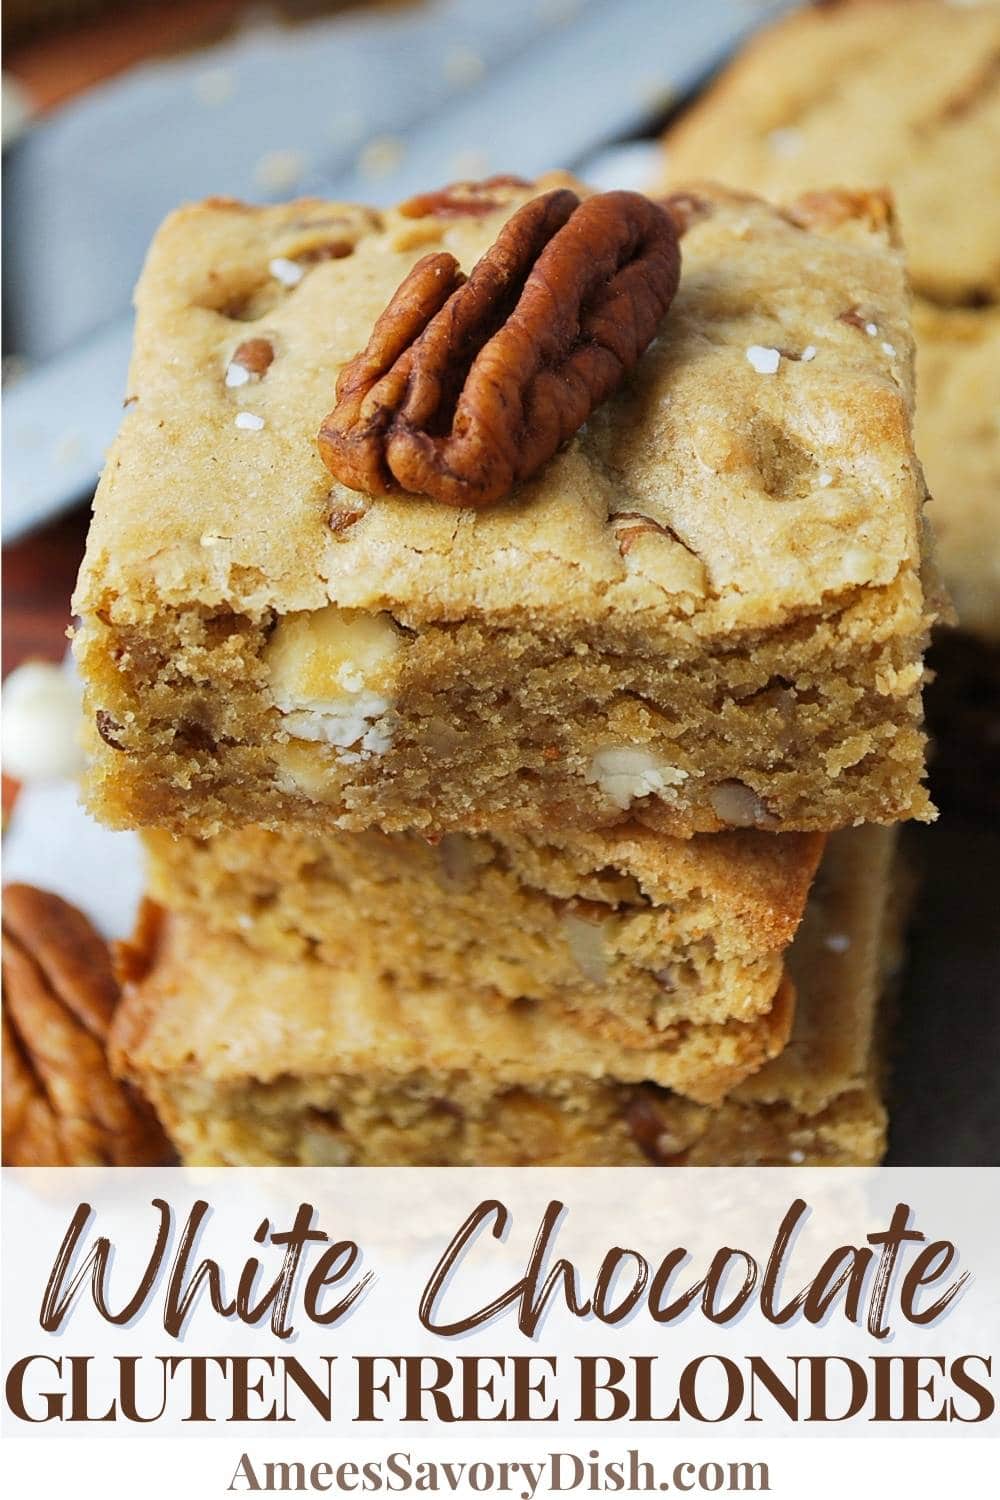 These Gluten-Free Blondies are chewy, gooey, and loaded with decadent morsels of white chocolate. via @Ameessavorydish